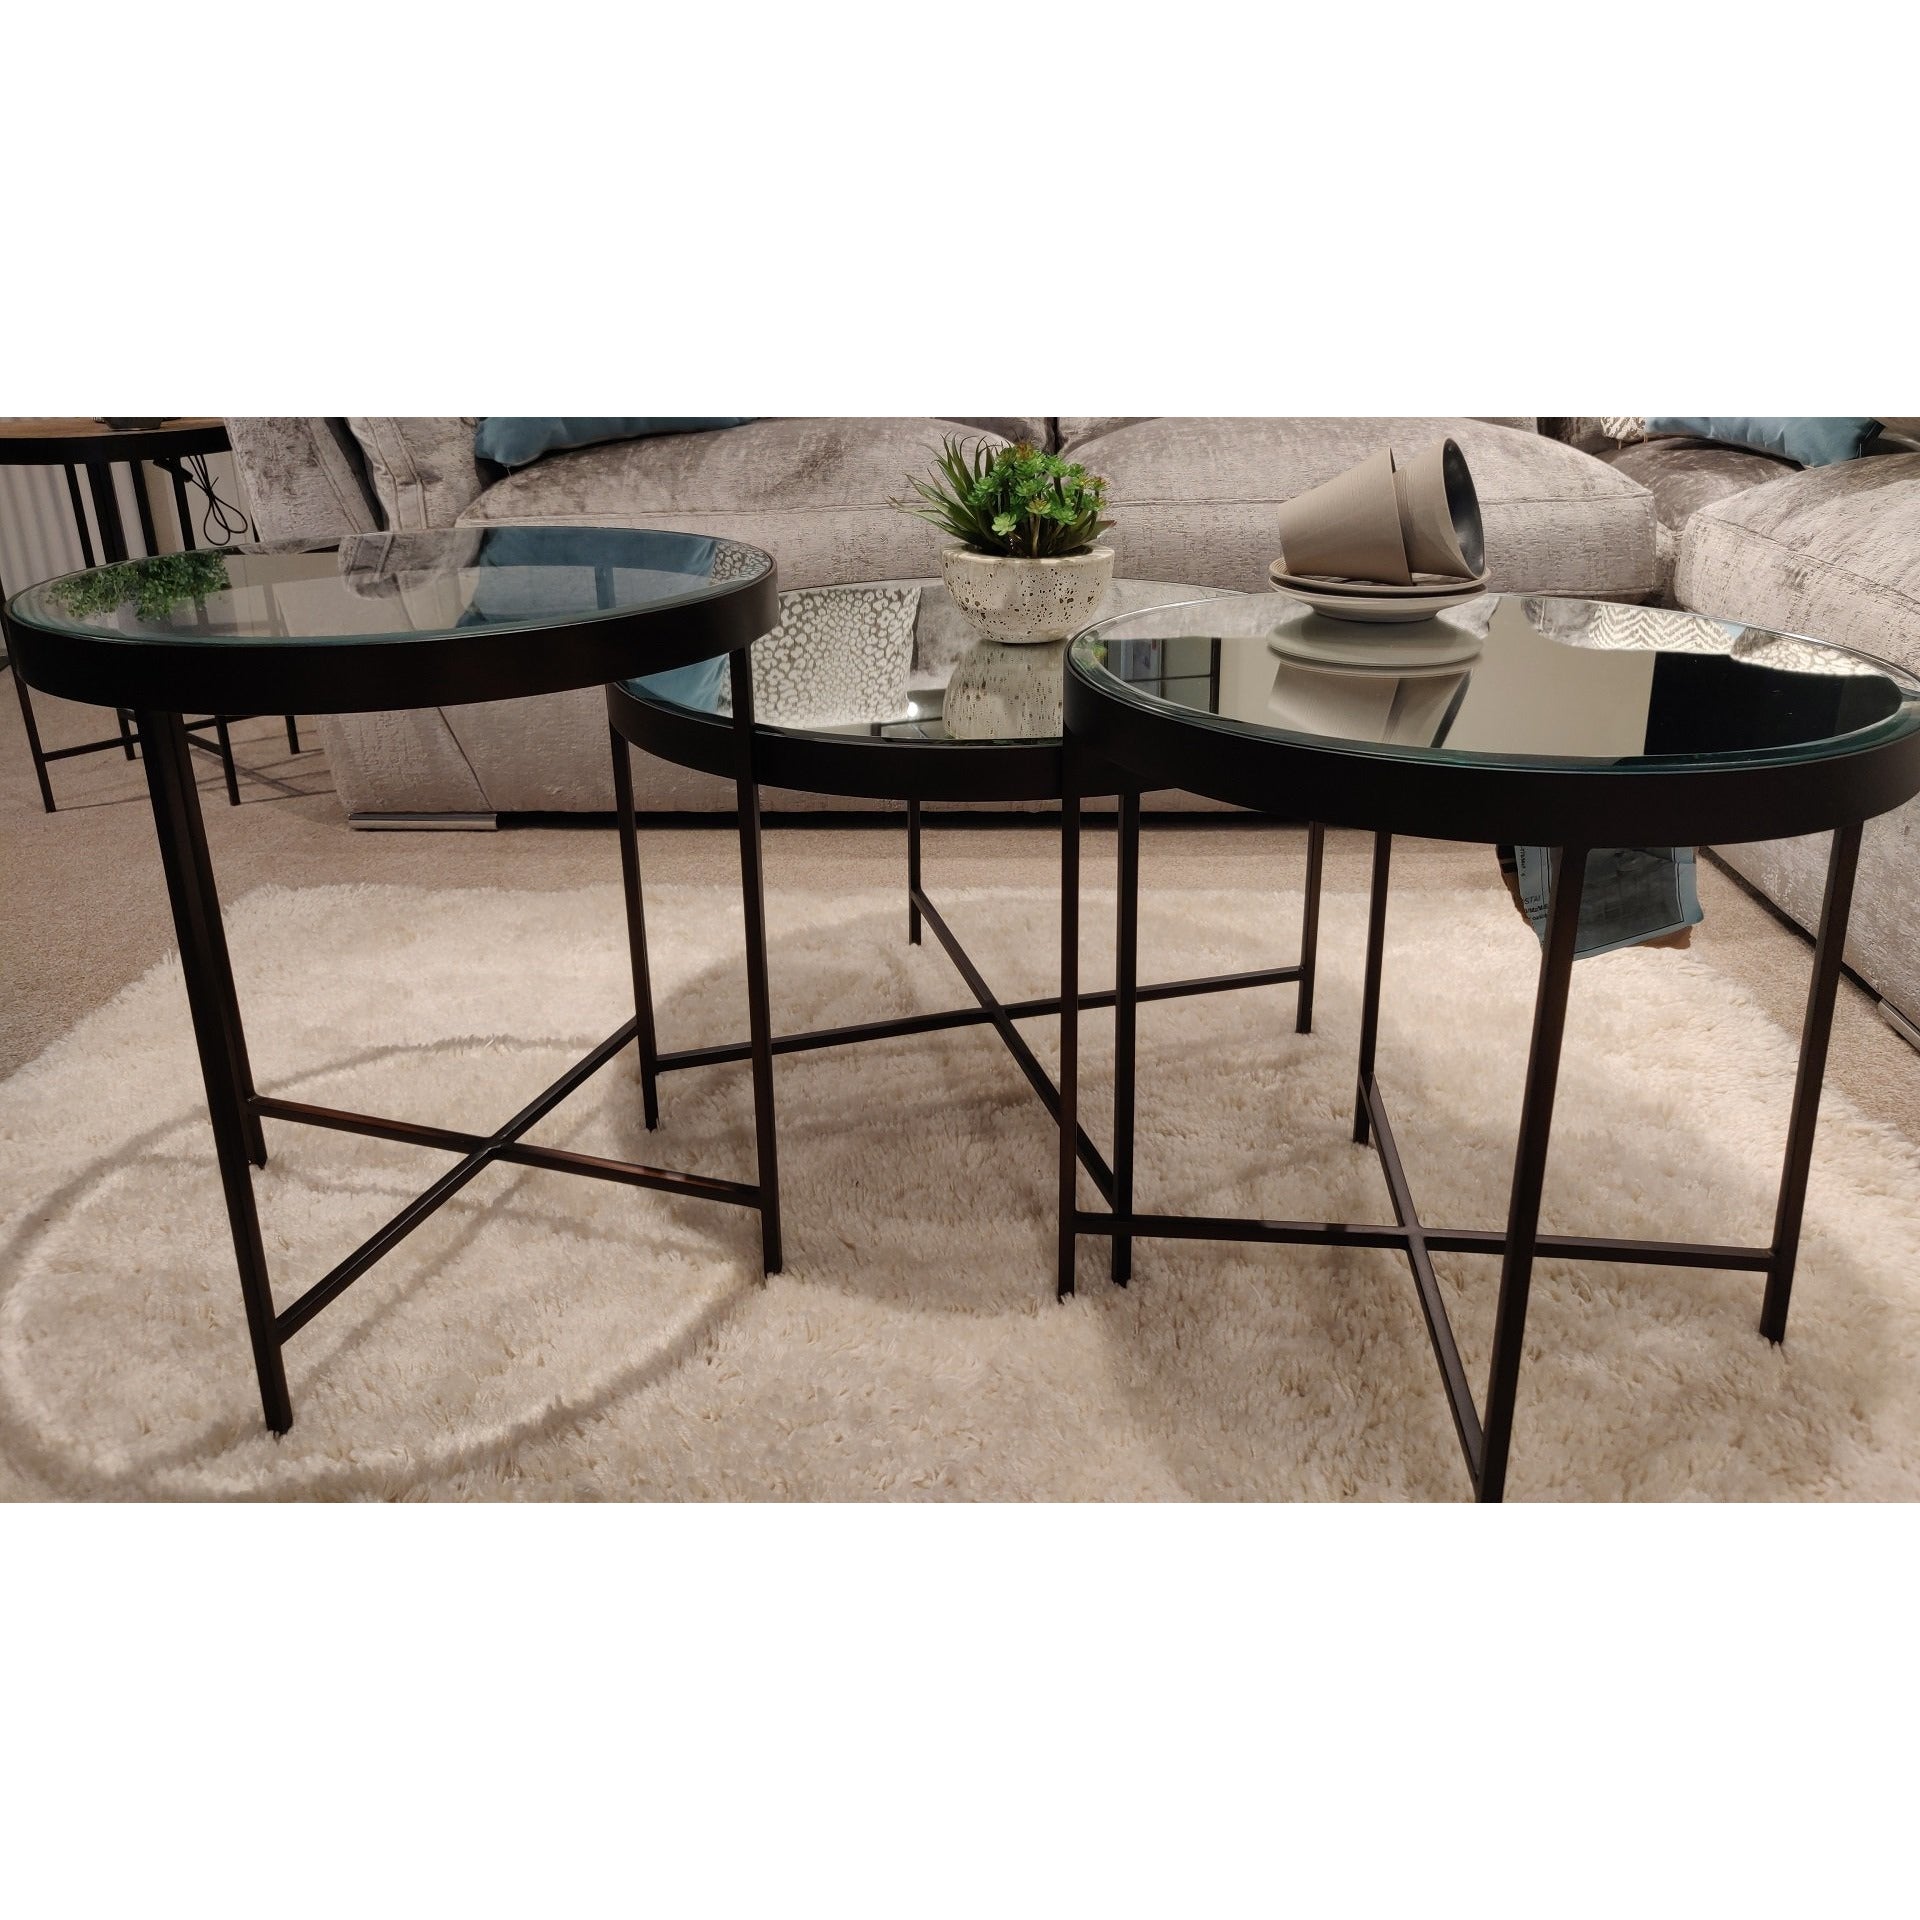 Manhattan Trio Of Coffee Tables from Upstairs Downstairs Furniture in Lisburn, Monaghan and Enniskillen